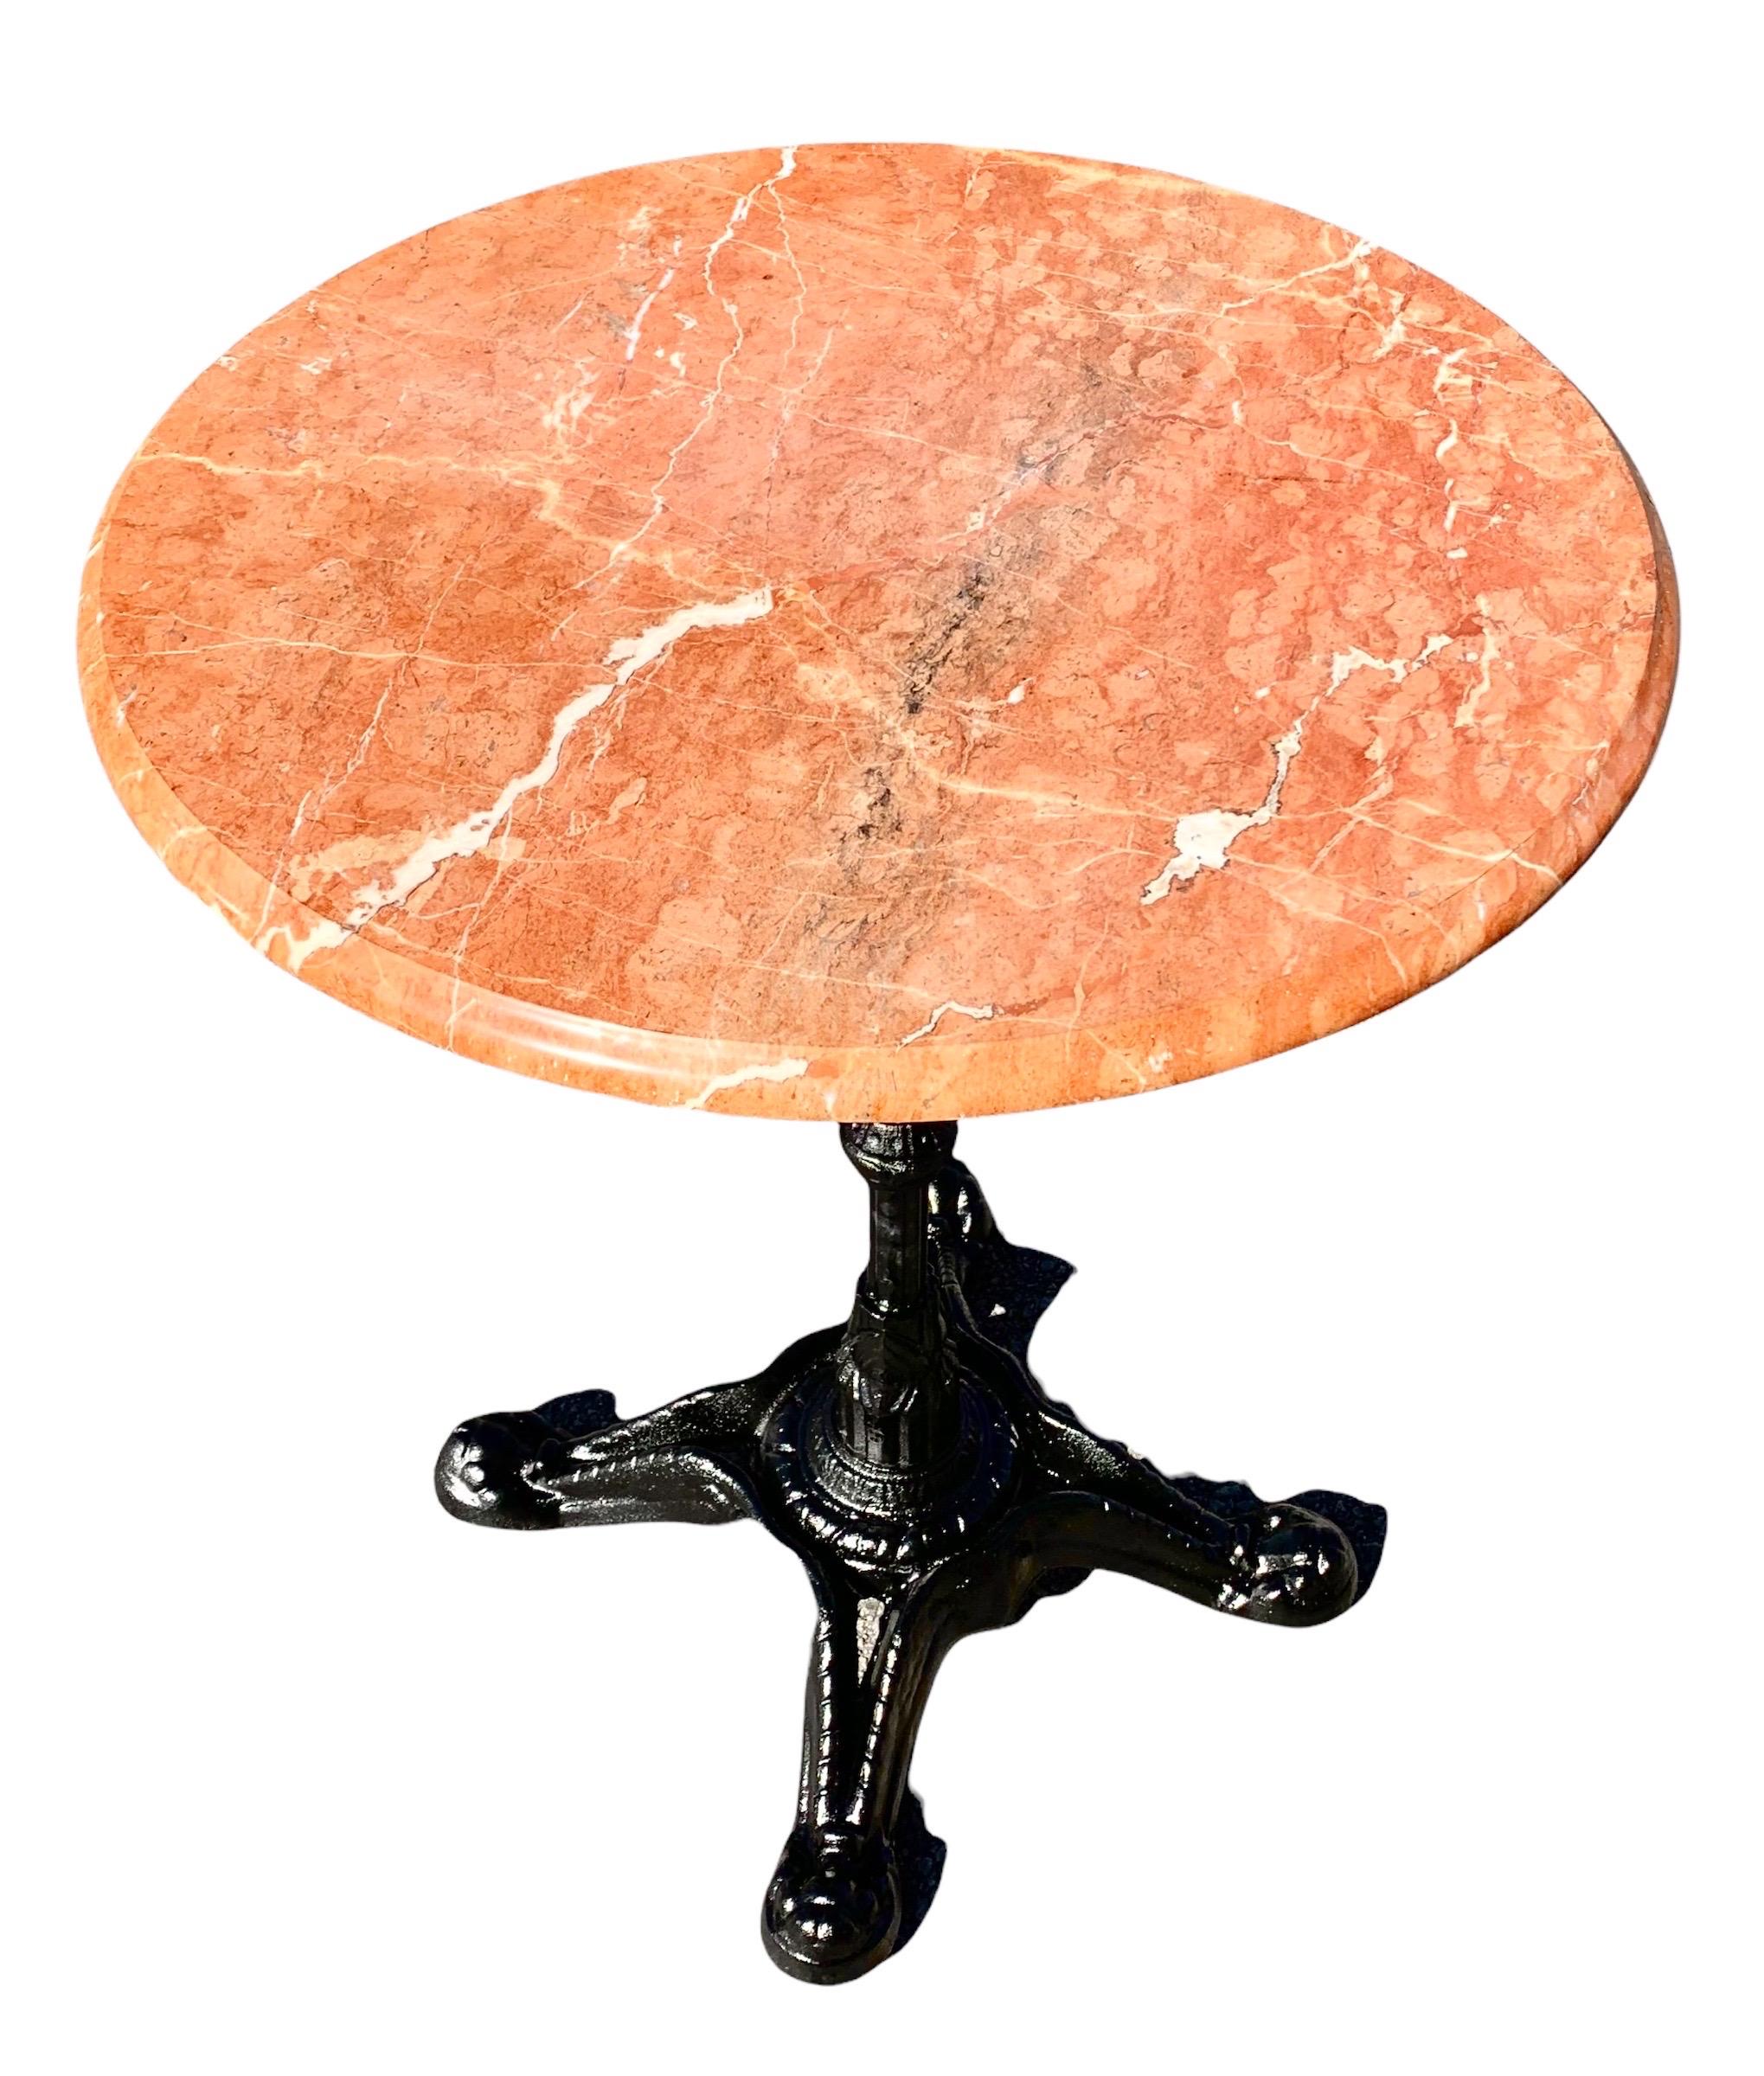 A charming French iron and marble bistro table with sienna color ogee edge marble and black enamel painted iron base. As seen in the coffee shops and bistro's of Paris, this table exudes charm and style and can also be used outside under a covered